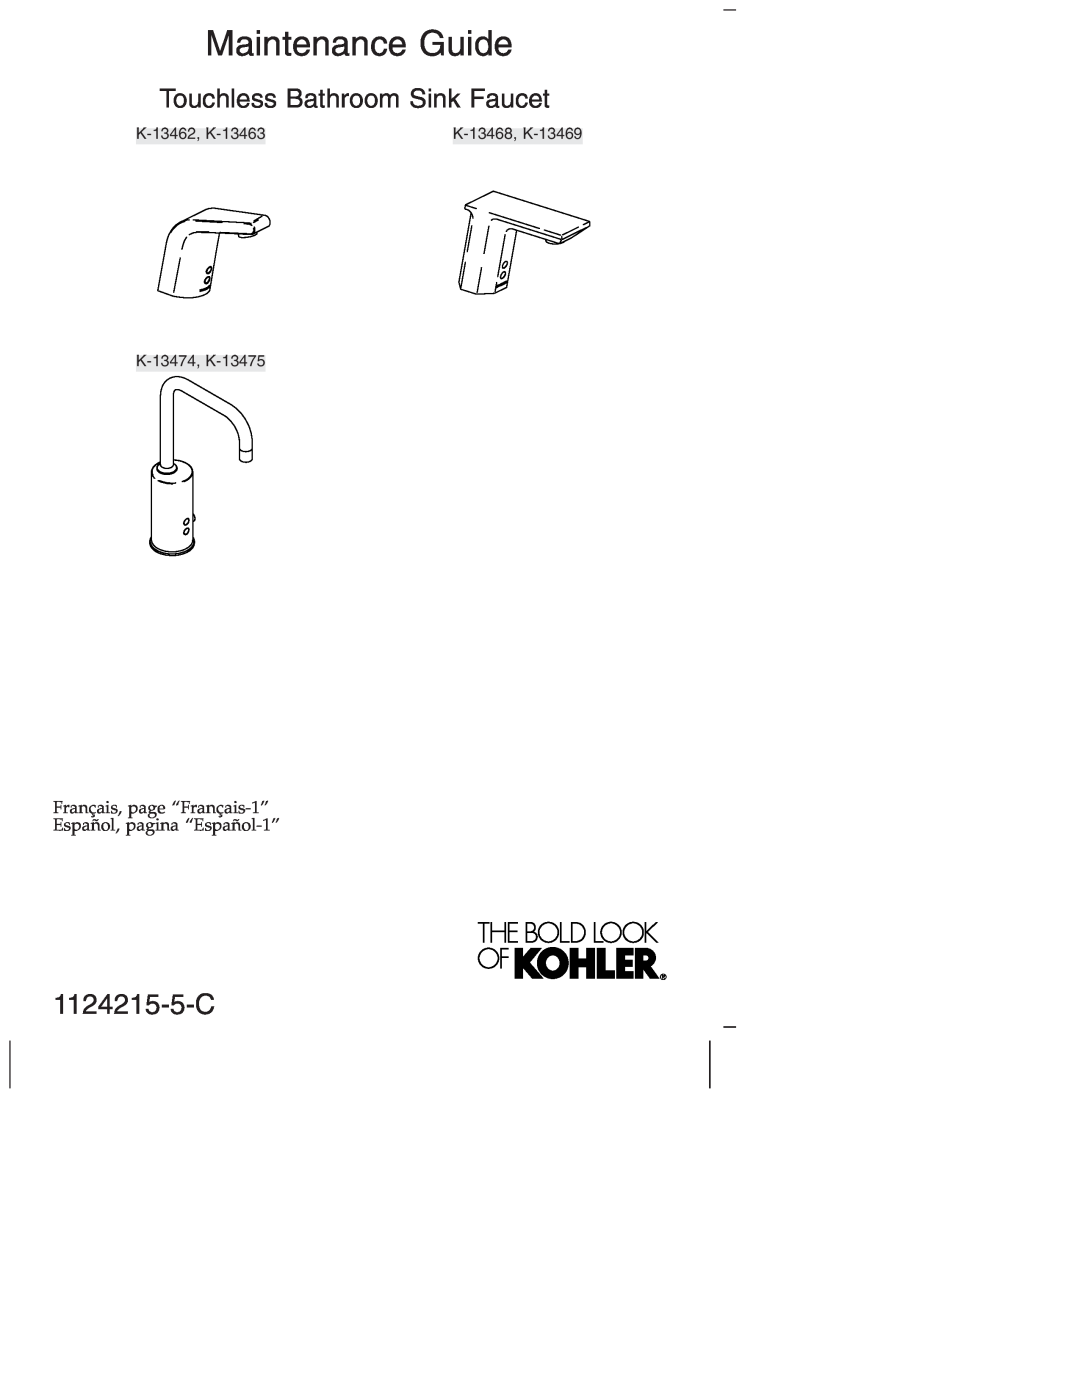 Kohler K-1375 manual Homeowners Guide, Bath with Airjets, 1038265-5-B 